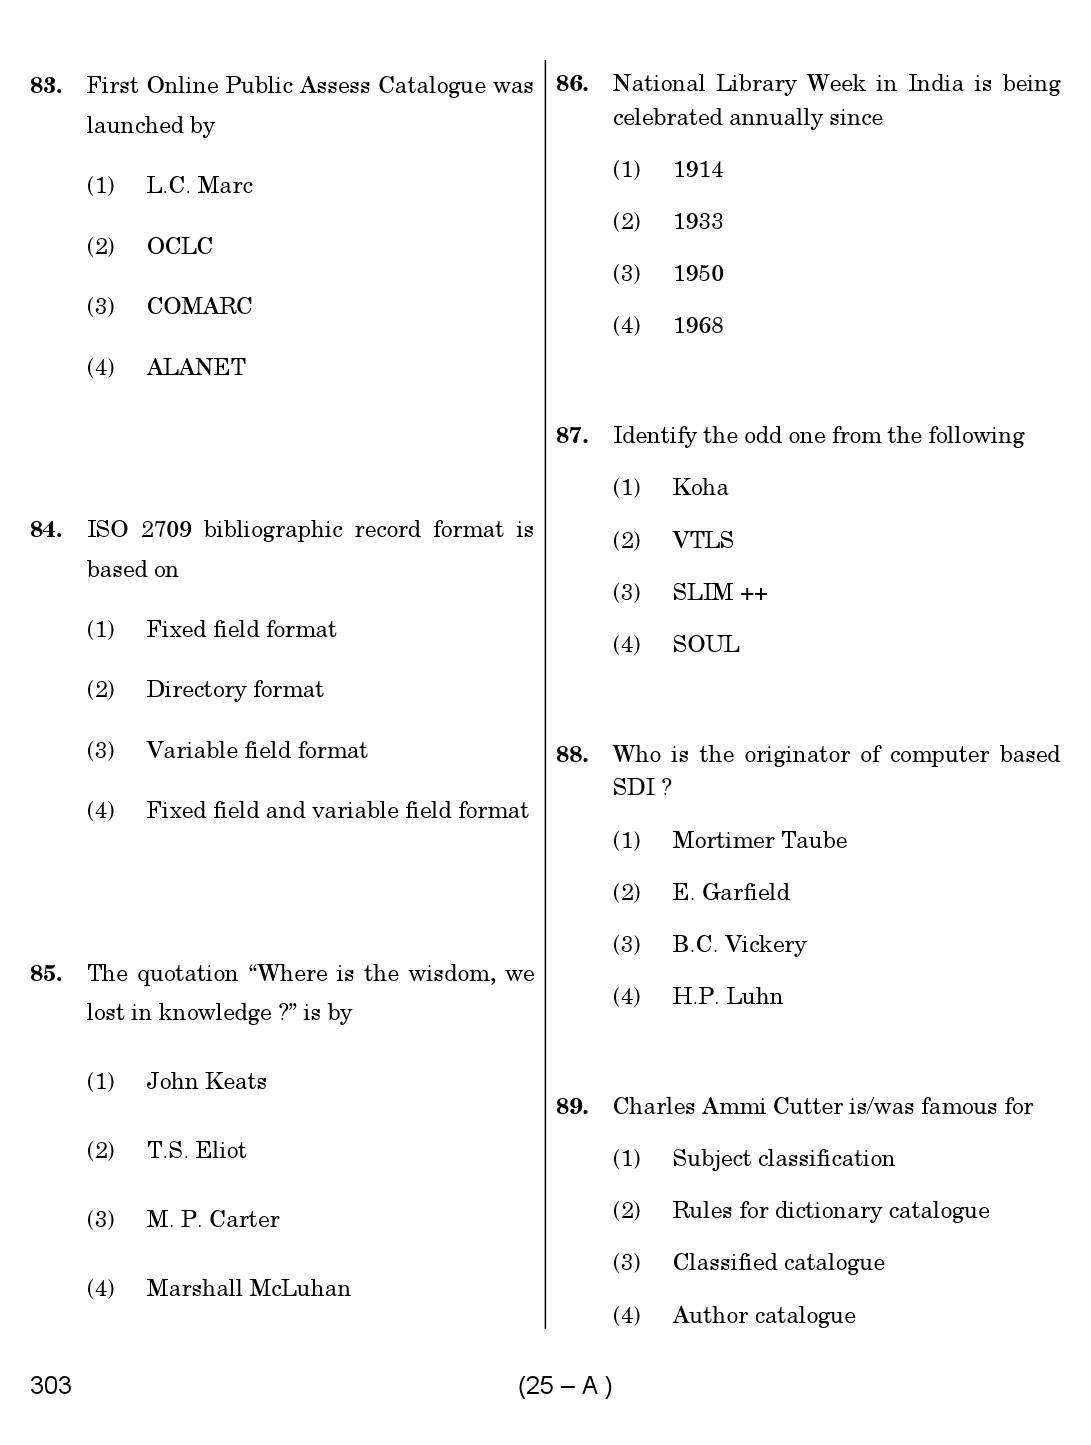 Karnataka PSC 303 Specific Paper II Librarian Exam Sample Question Paper 25